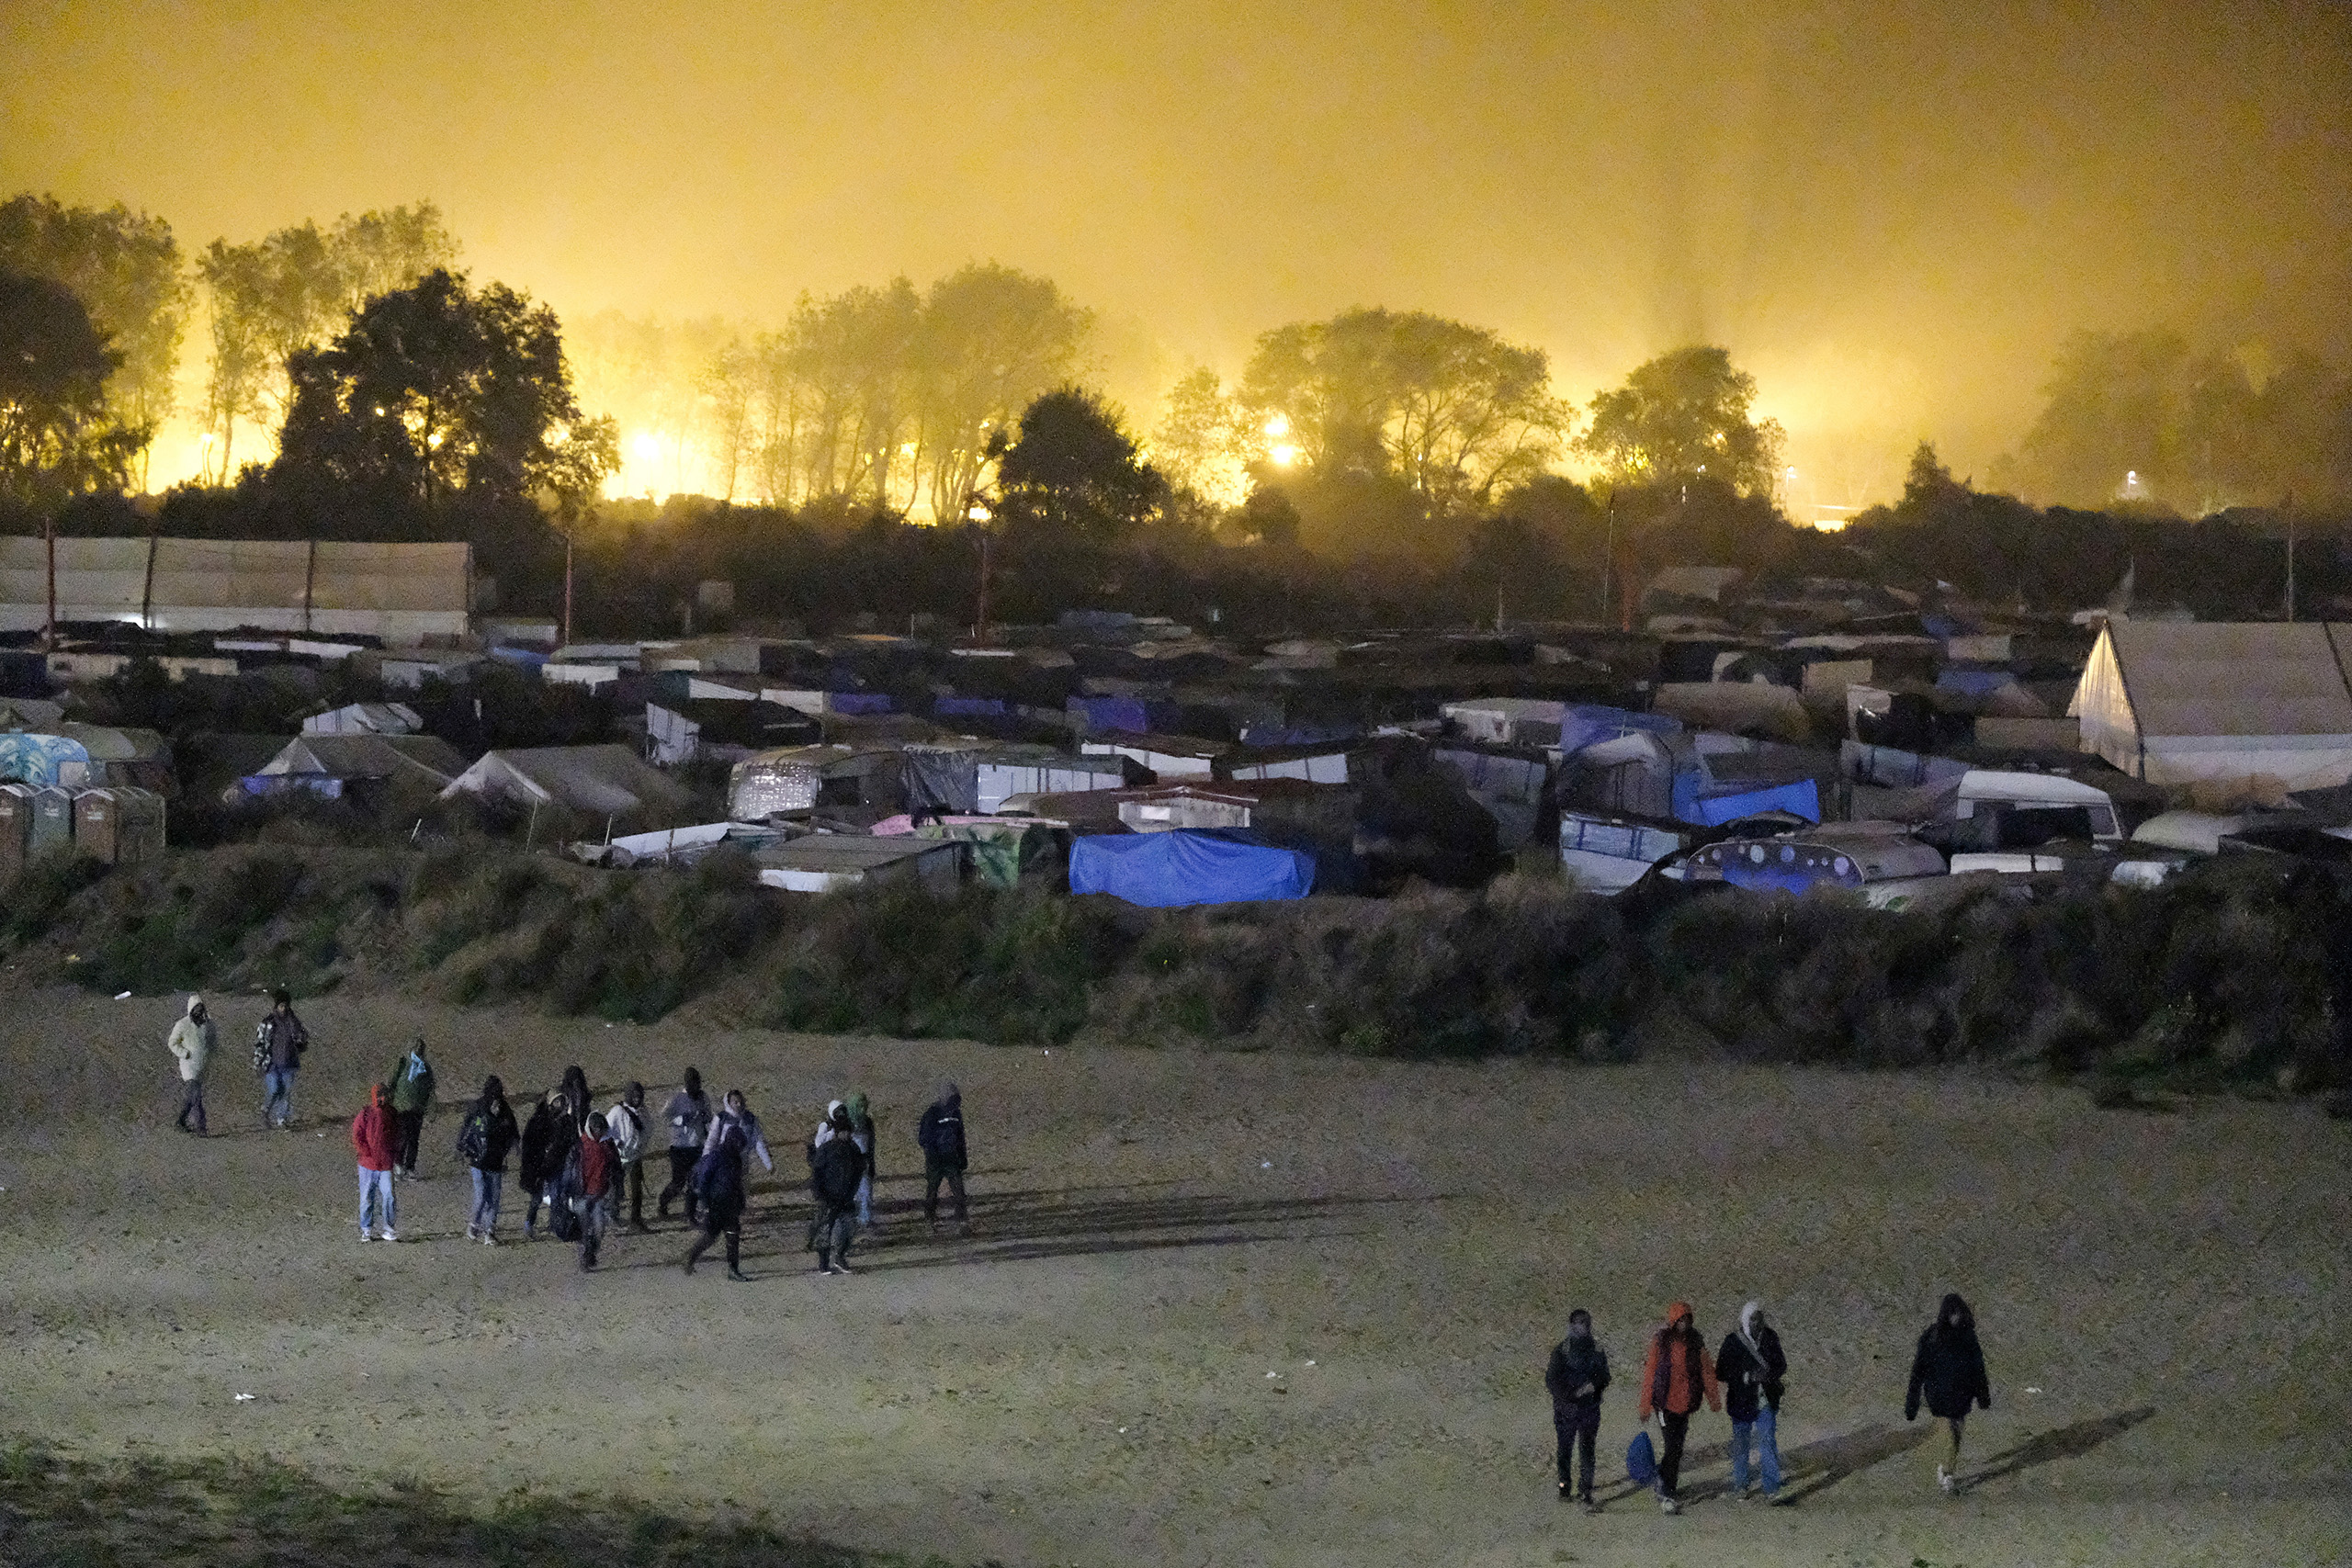 Migrants begin to leave the squalid  Jungle  camp, which authorities began to dismantle this week in a bid to move thousands of inhabitants elsewhere, in Calais, northern France, on Oct. 24, 2016.